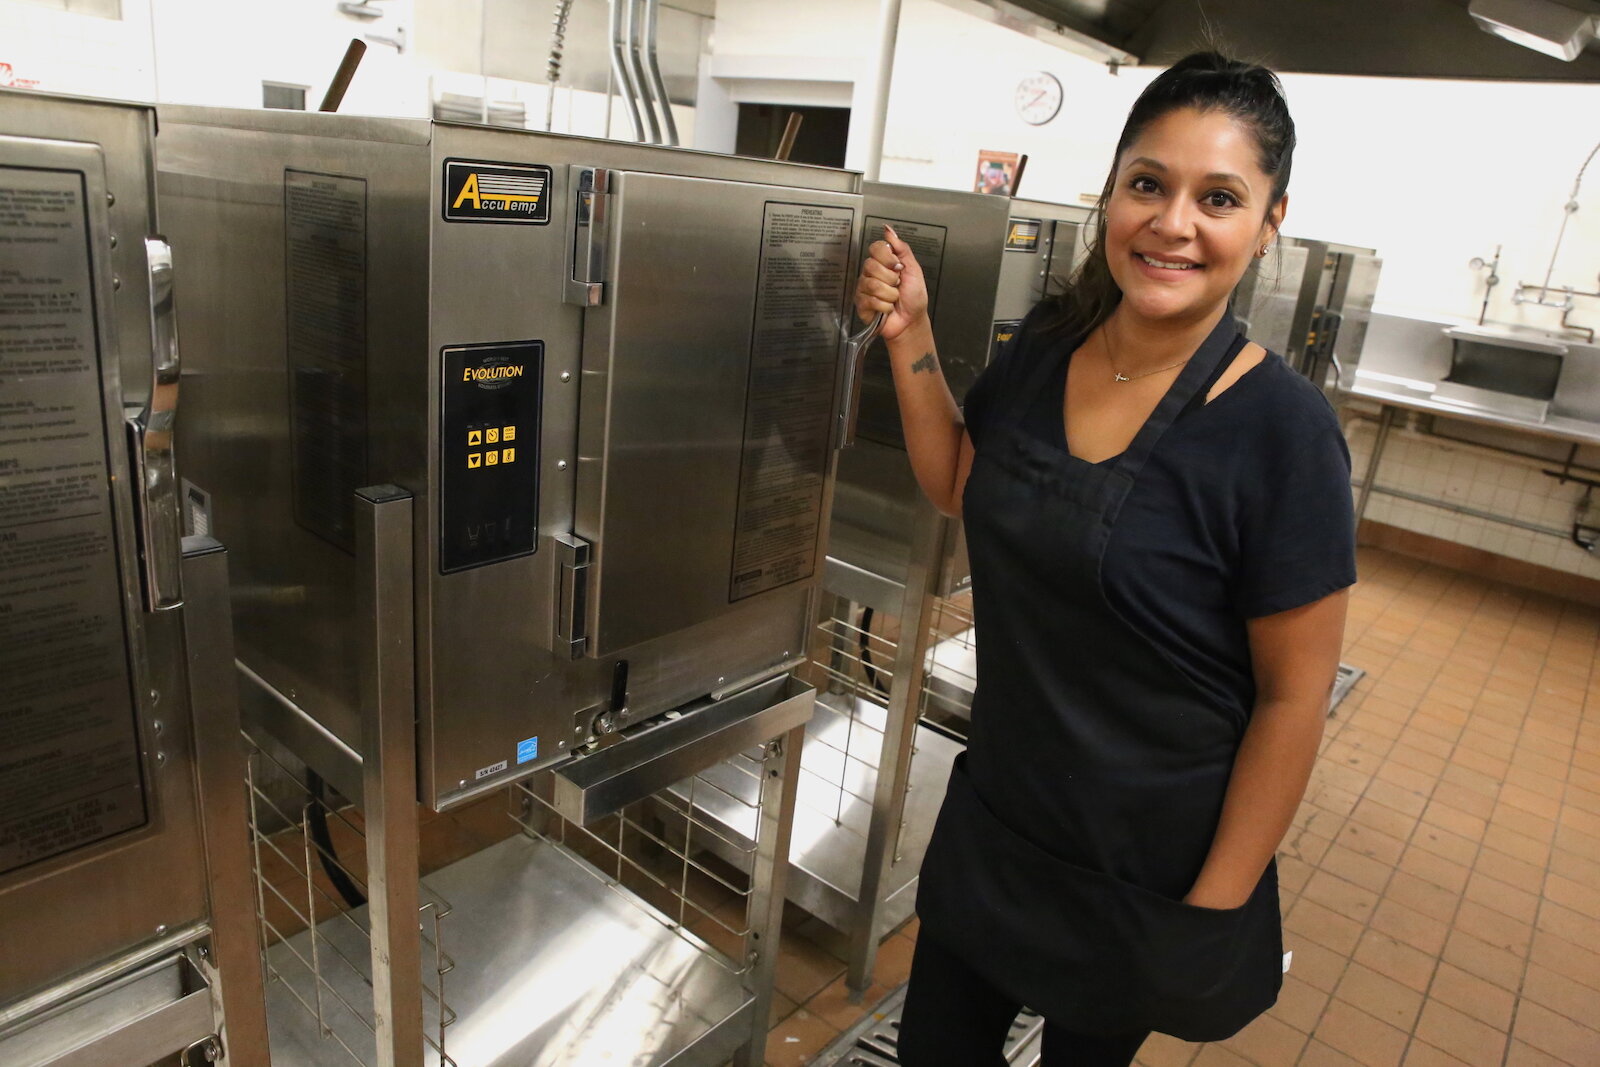 Ruiz poses with her favorite kitchen tool: The industrial steamers at the Community Harvest Food Bank's shared kitchen.